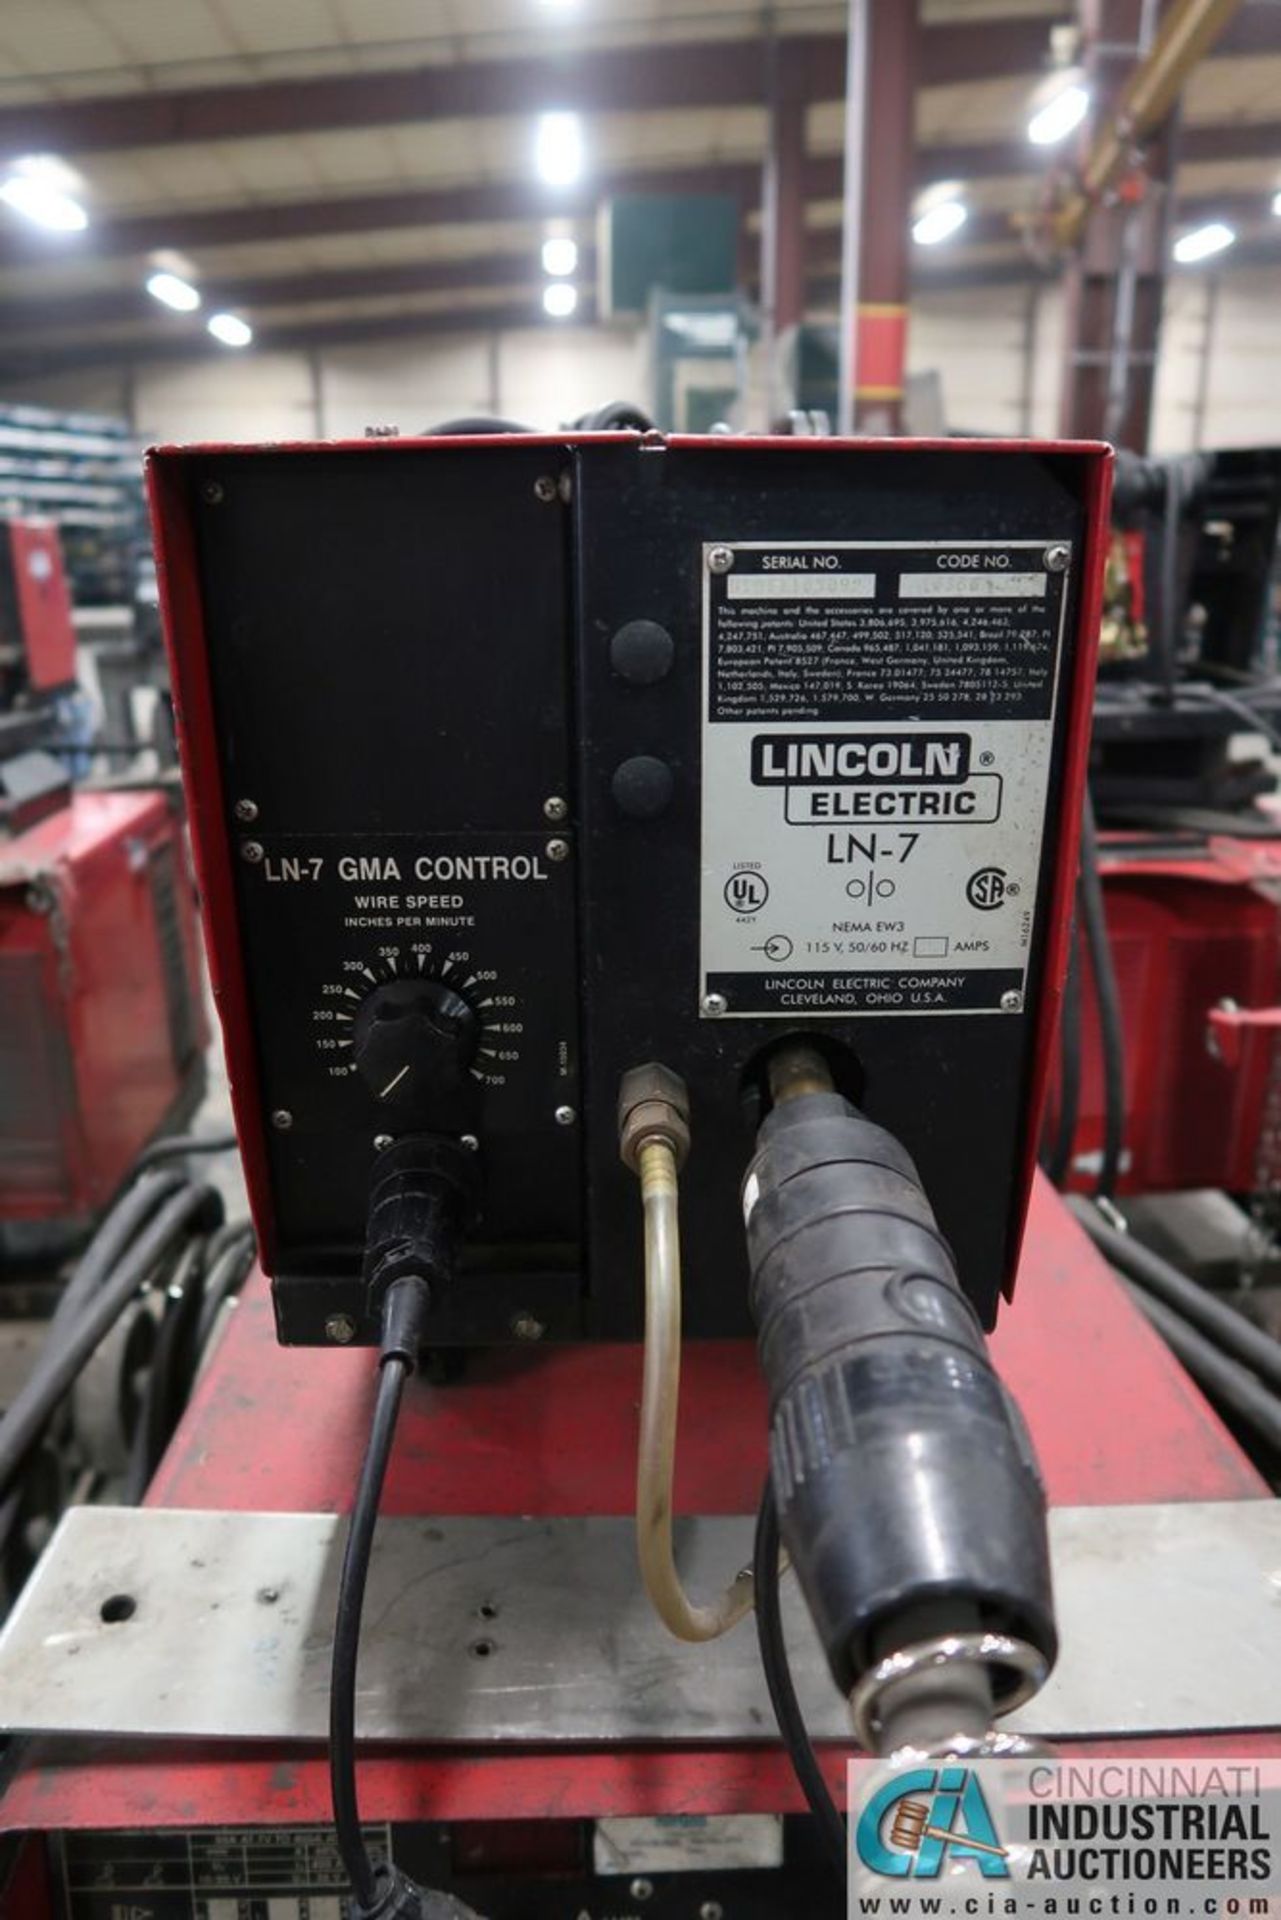 300 AMP LINCOLN CV-300 WELDER; S/N U1971010901, WITH LINCOLN LN-7 WIRE FEED - Image 6 of 7